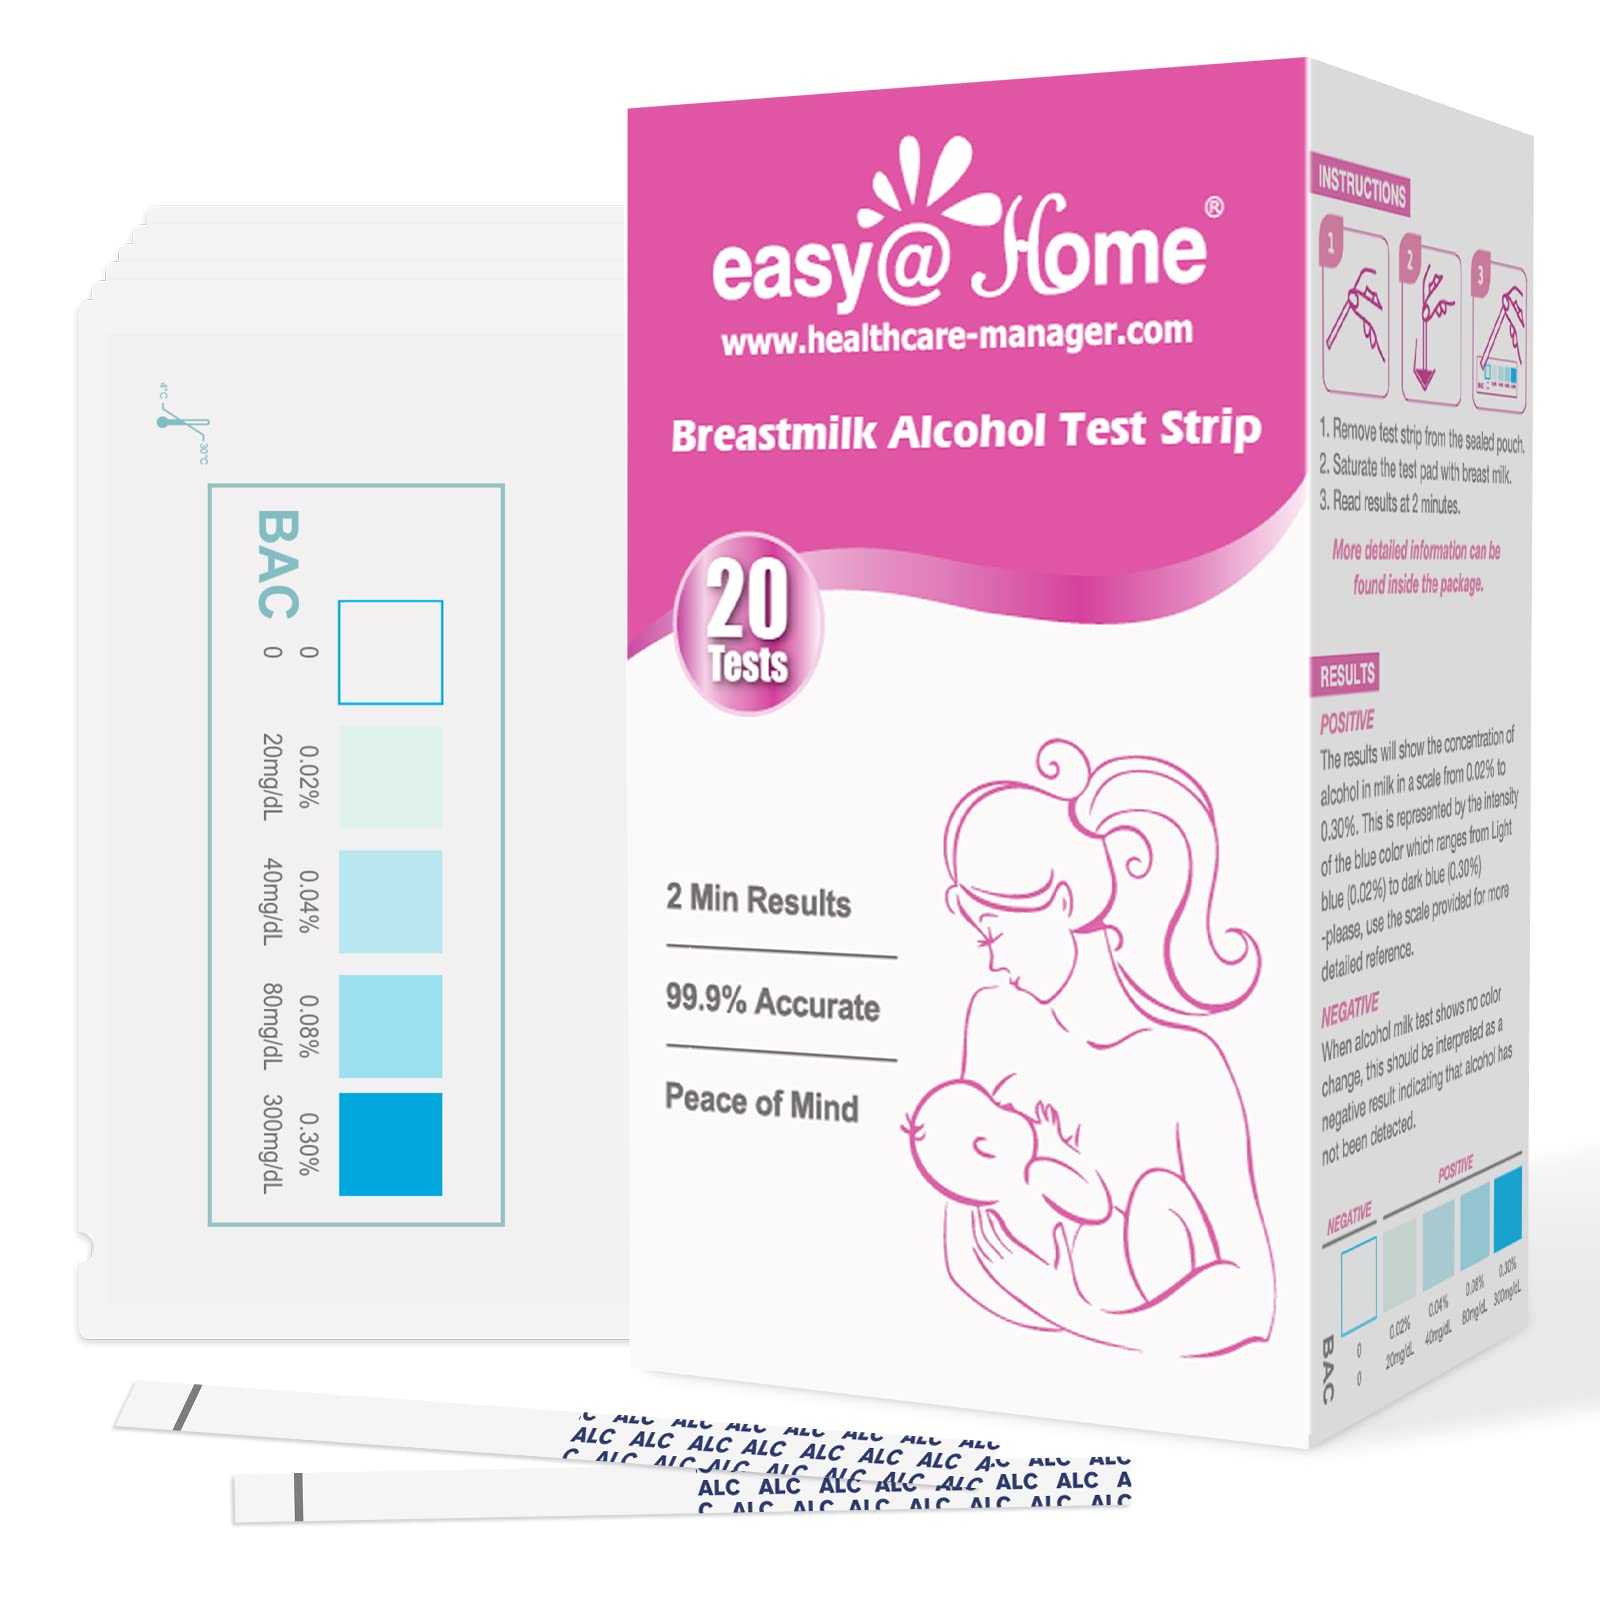 Easy@Home Breastmilk Alcohol Test Strips, at Home Alcohol Test for